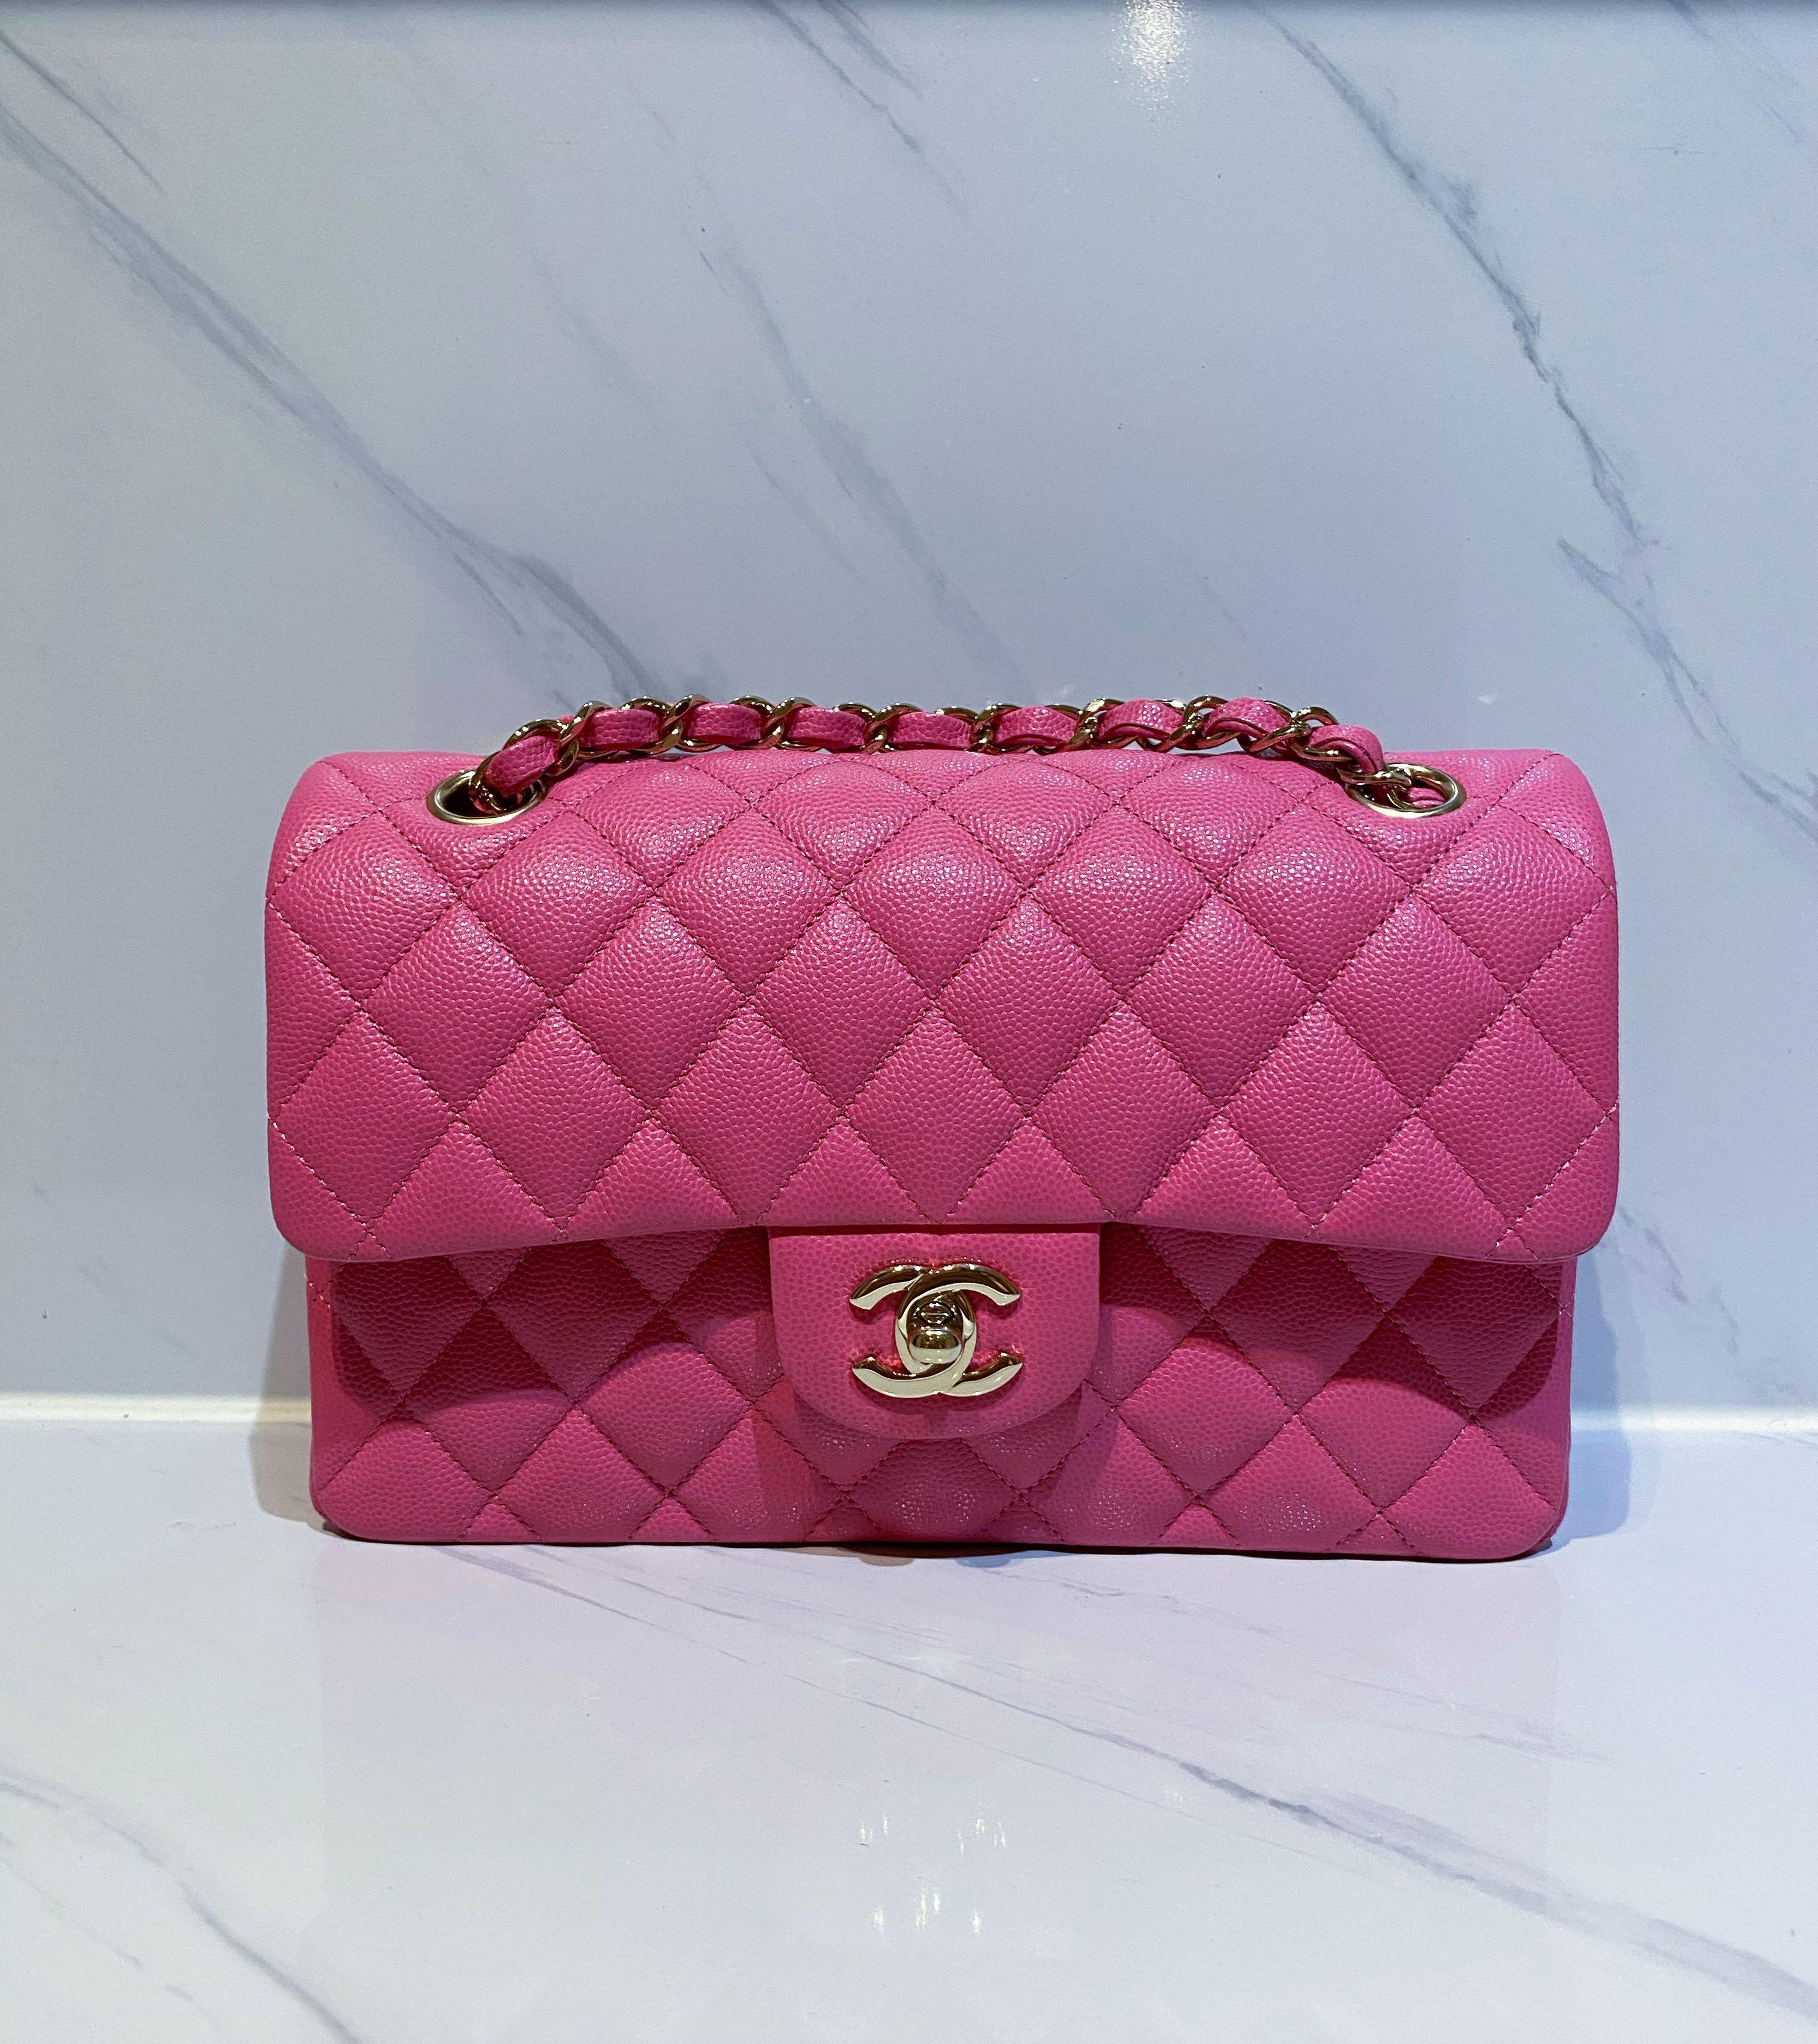 Chanel classic small bubble gum pink